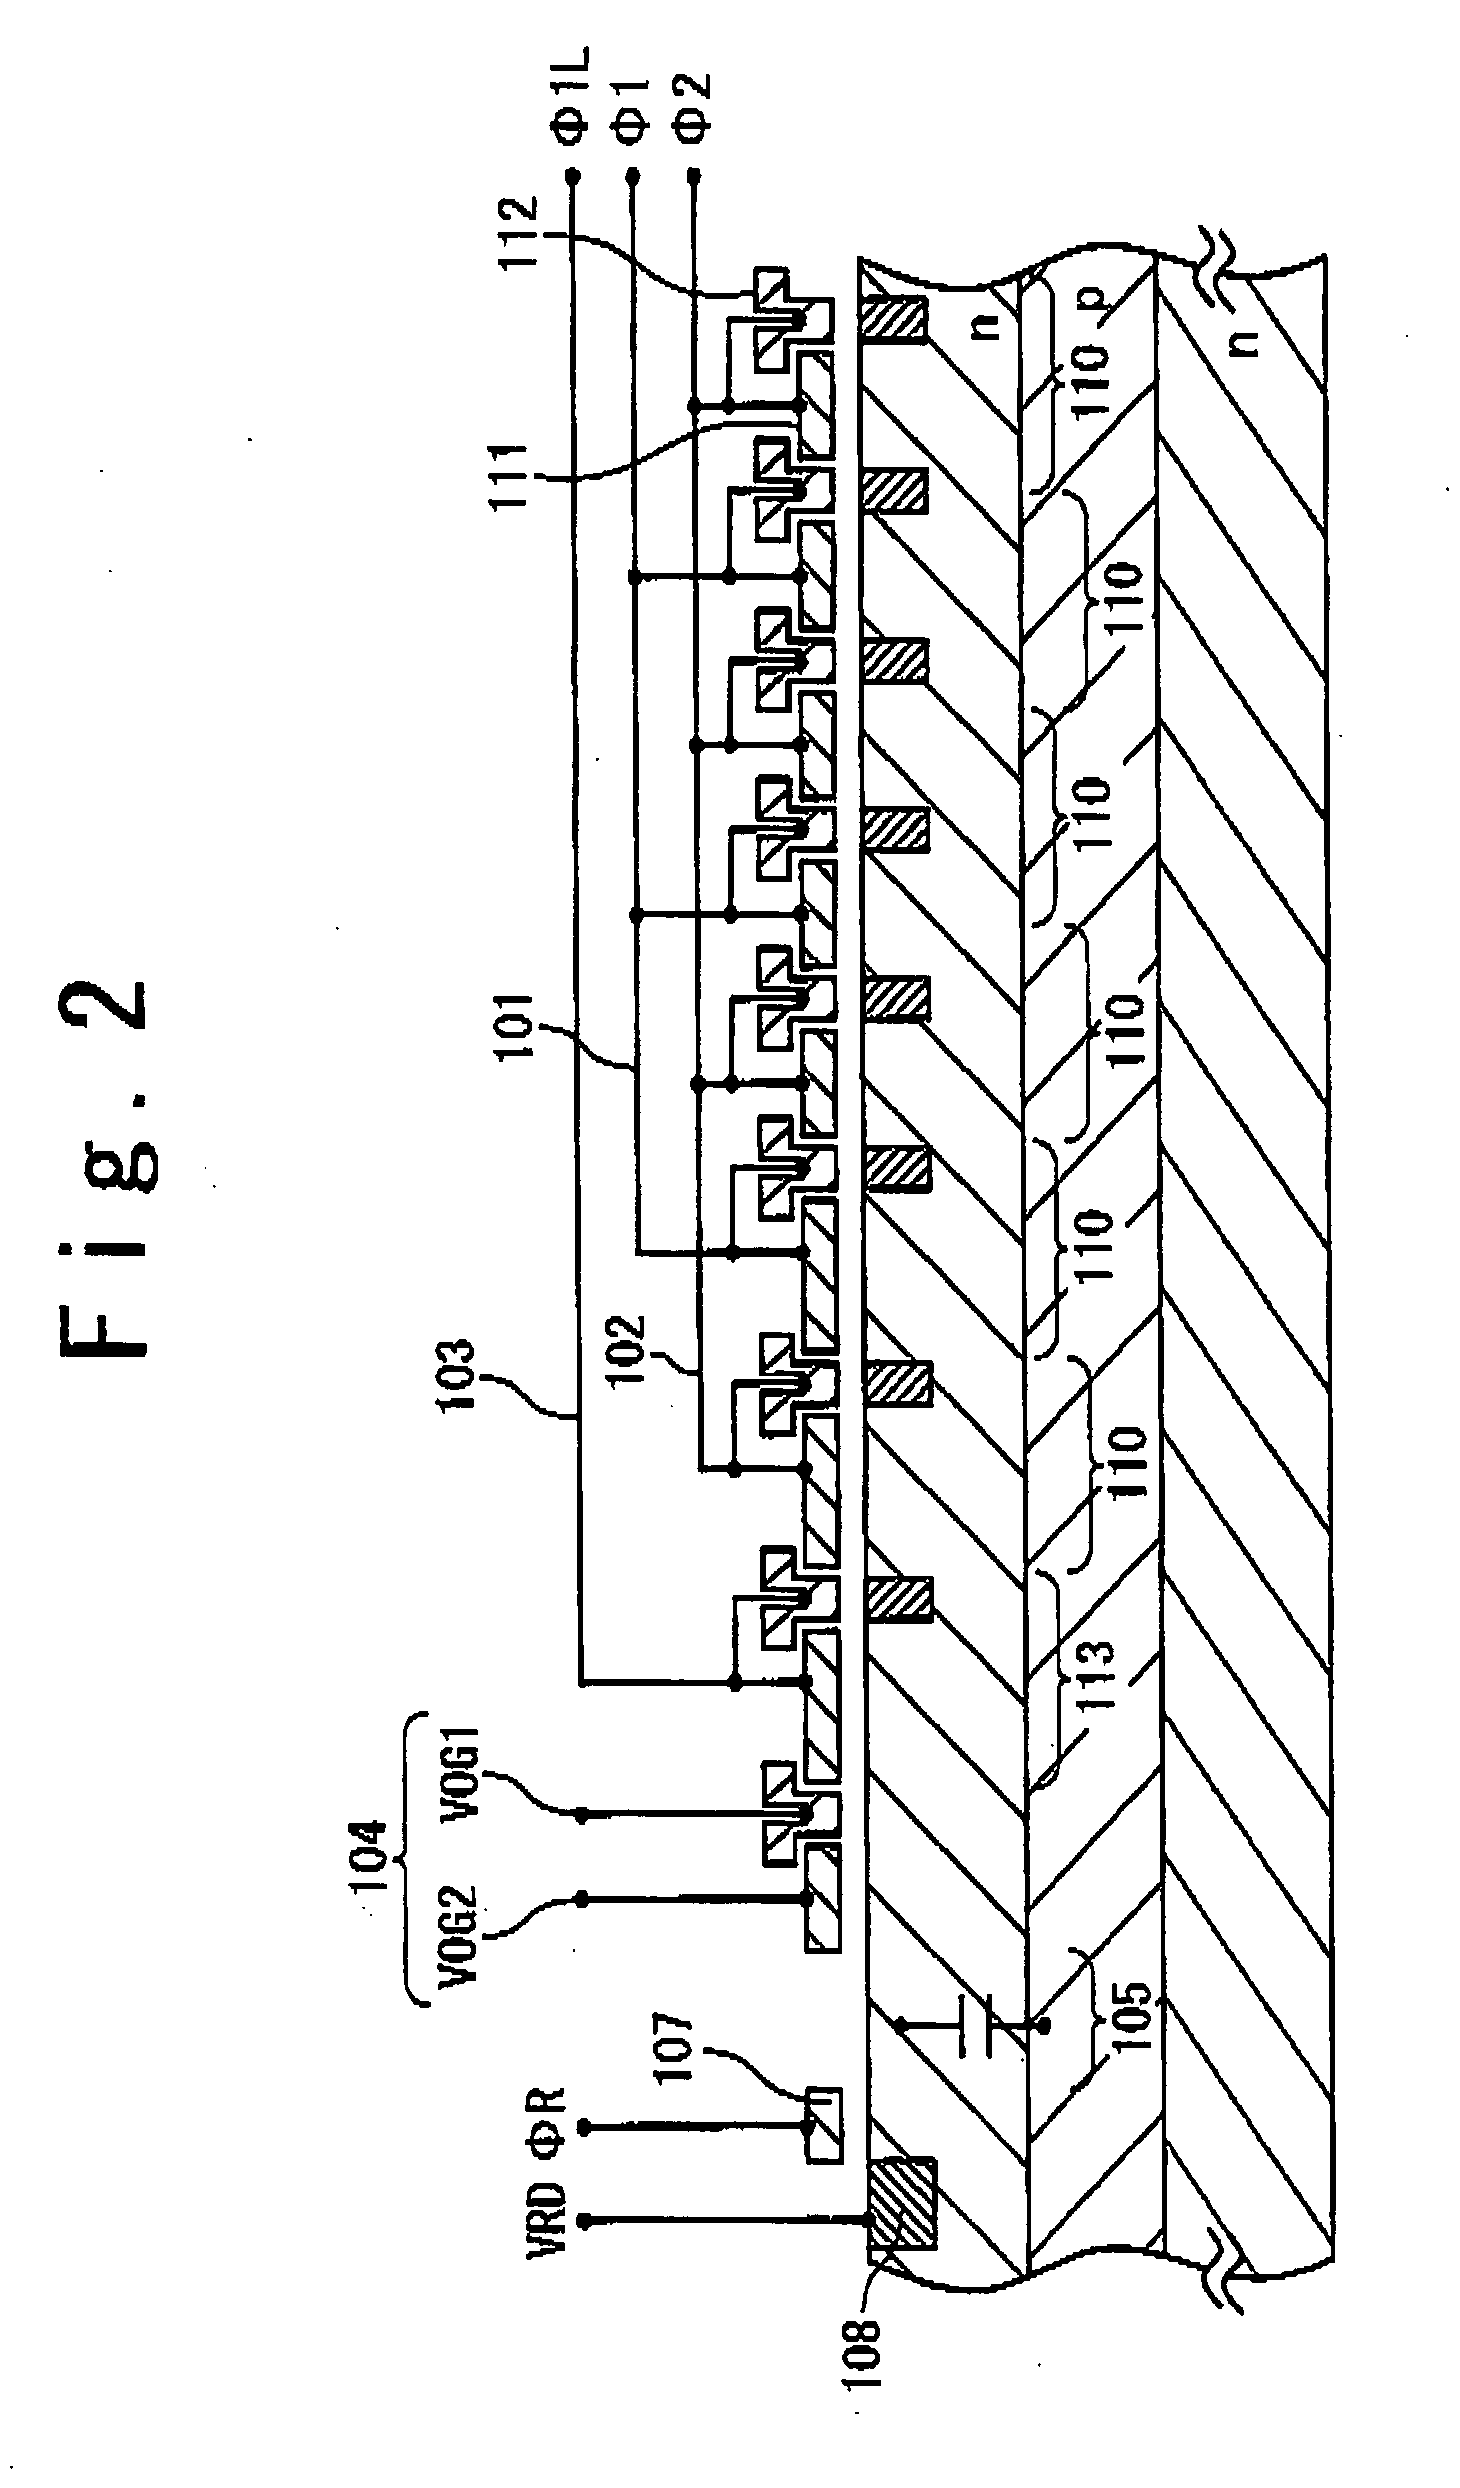 Solid-state image sensing device and method of operating the same